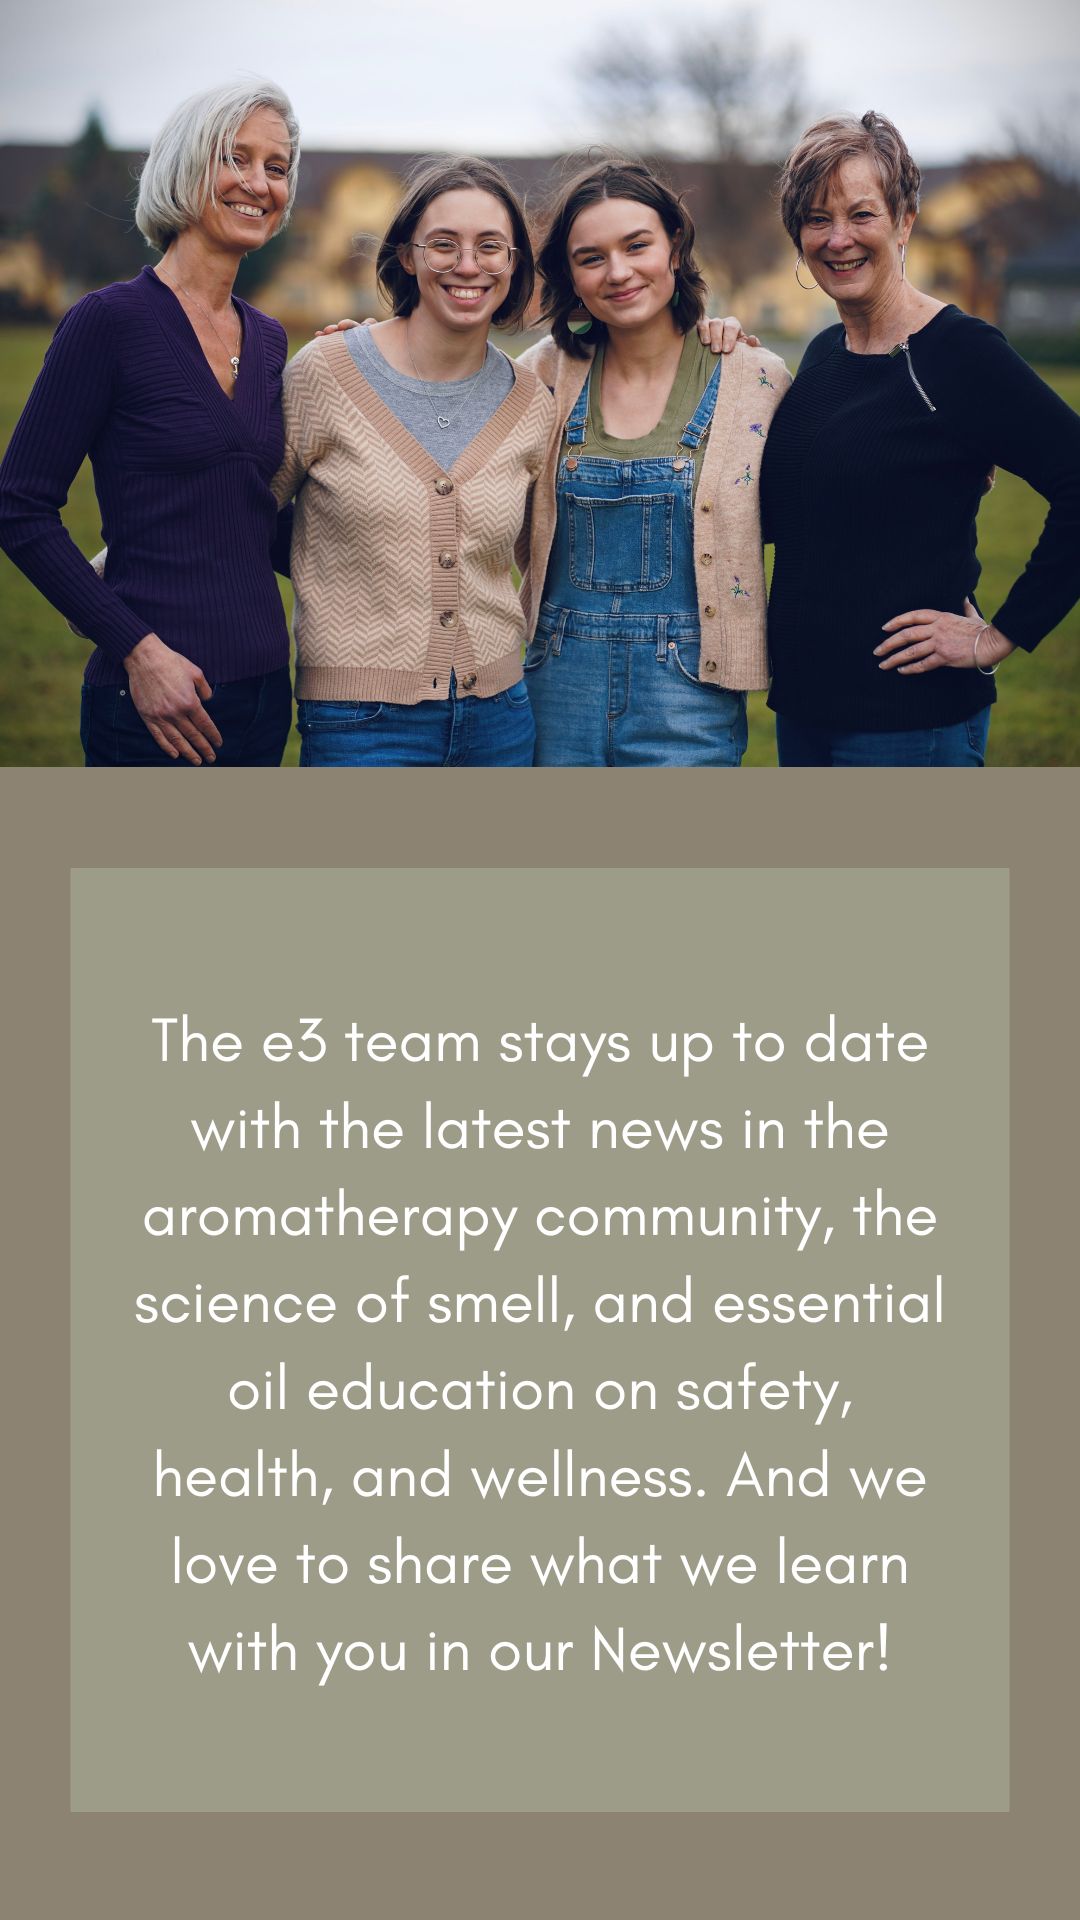 Sign up for e3’s free aromatherapy newsletter to receive up-to-date, well-researched information on aromatherapy and using essential oils safely, effectively and enjoyably.